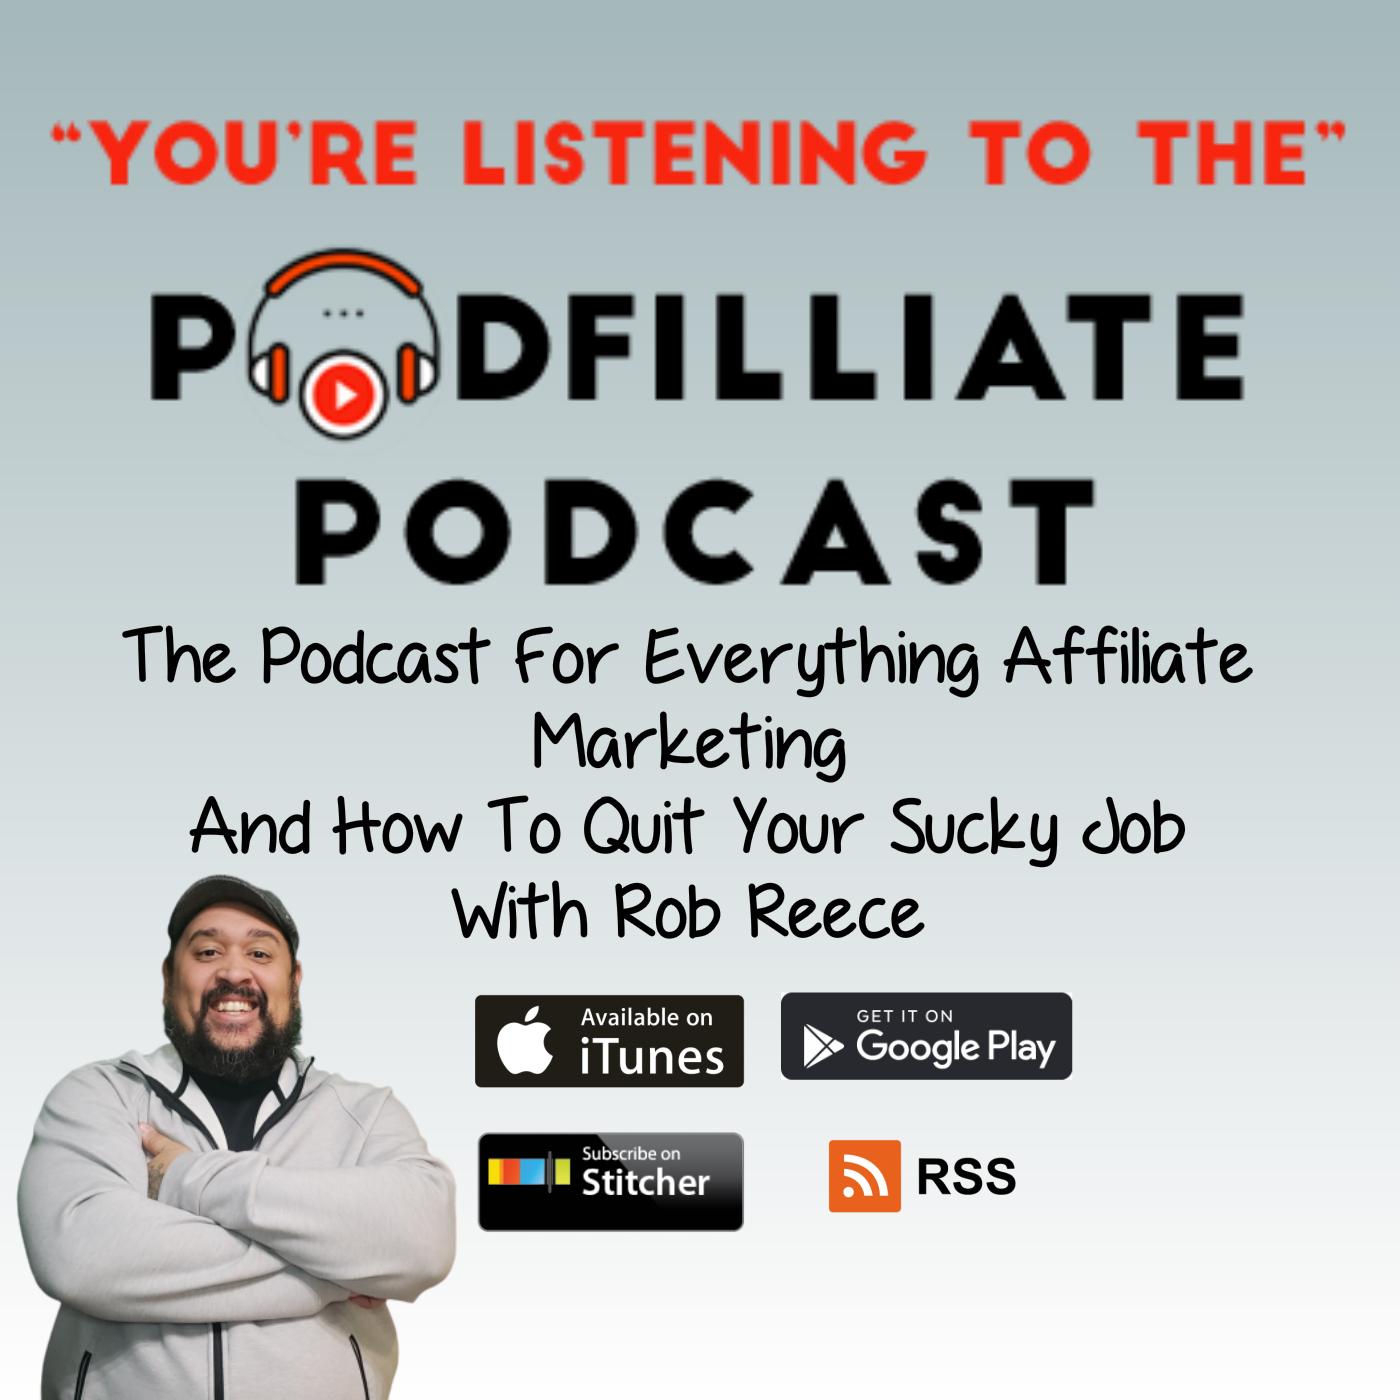 Podfilliate Podcast Ep. 1 - Facebook Pages Marketing Tricks And How To Get More Clicks To Your Affiliate Links